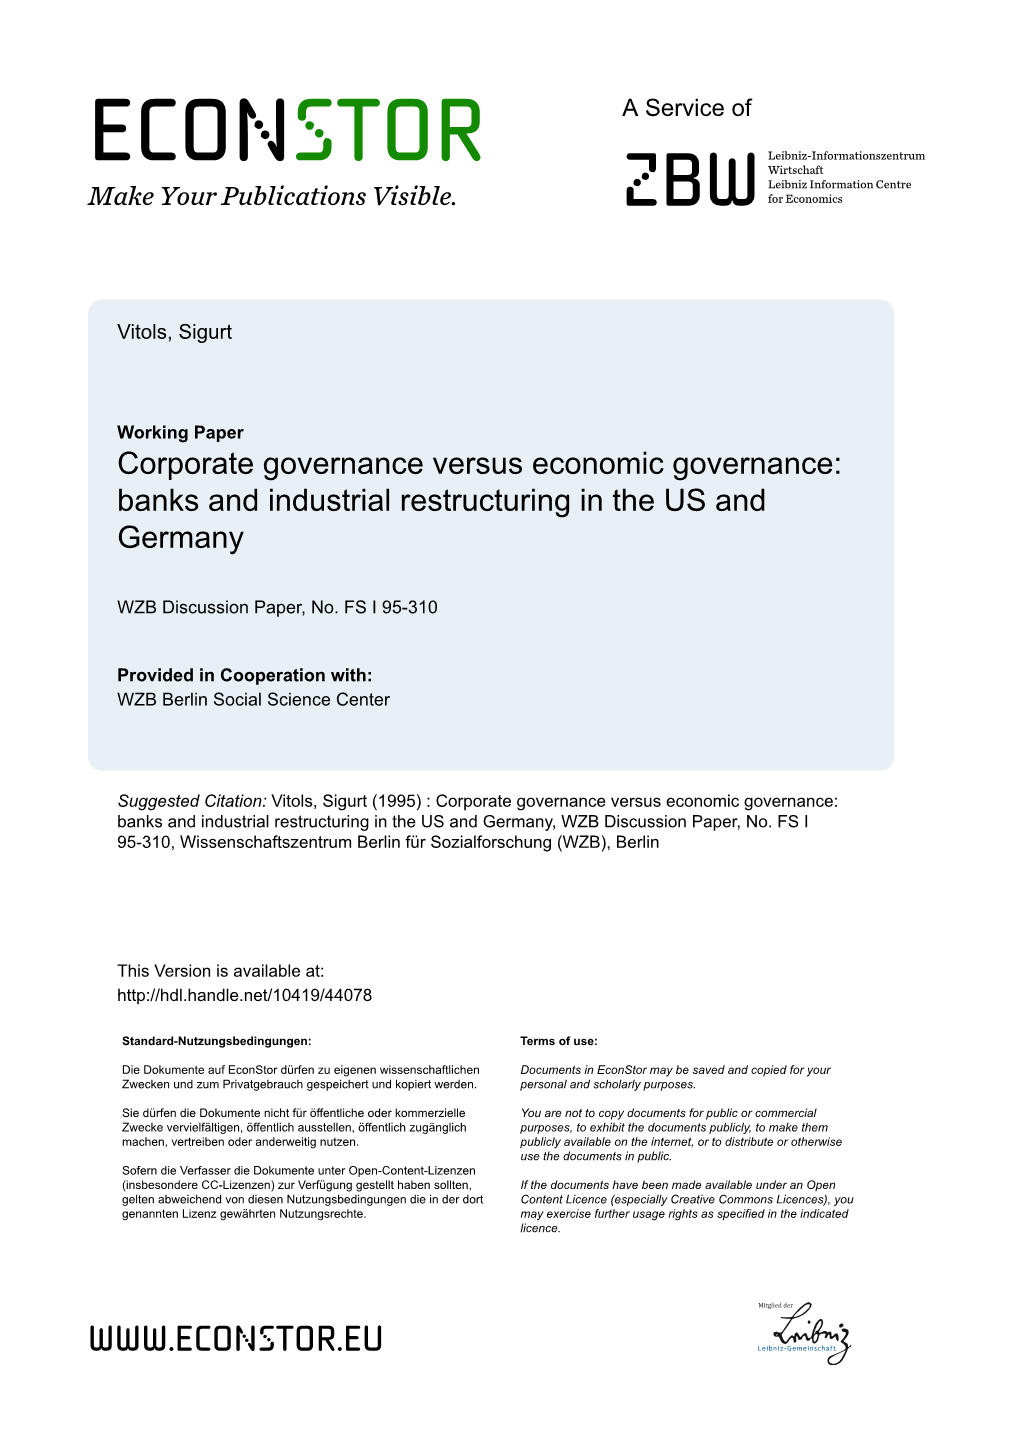 Corporate Governance Versus Economic Governance: Banks and Industrial Restructuring in the US and Germany